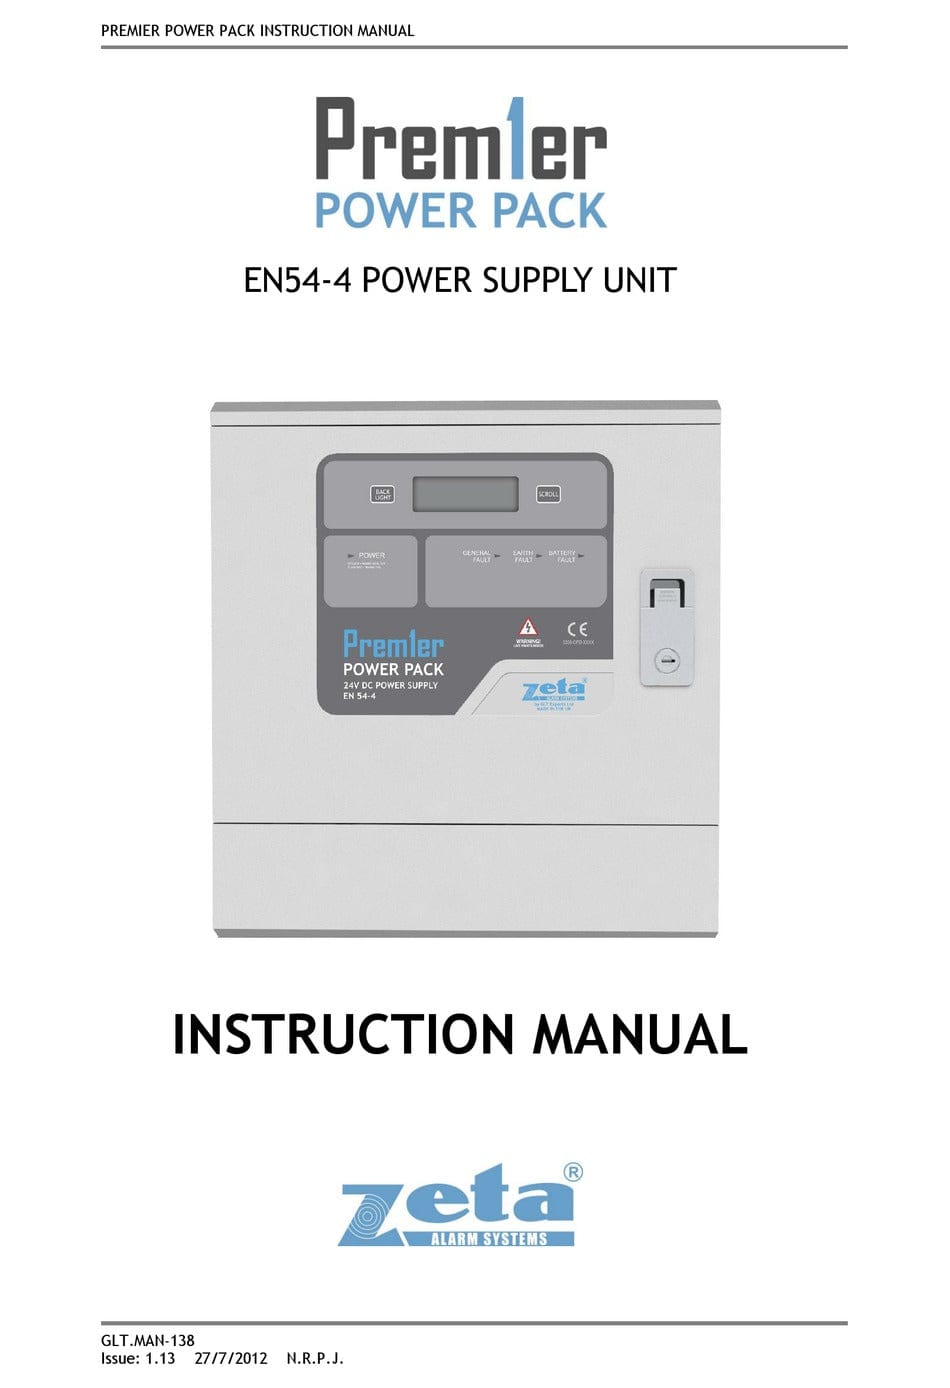 This versatile unit allows for convenient integration of additional input and output devices, enhancing the monitoring and control capabilities of your system. Available at Supply Master in Accra, Ghana. Fire Safety Equipment Buy Tools hardware Building materials